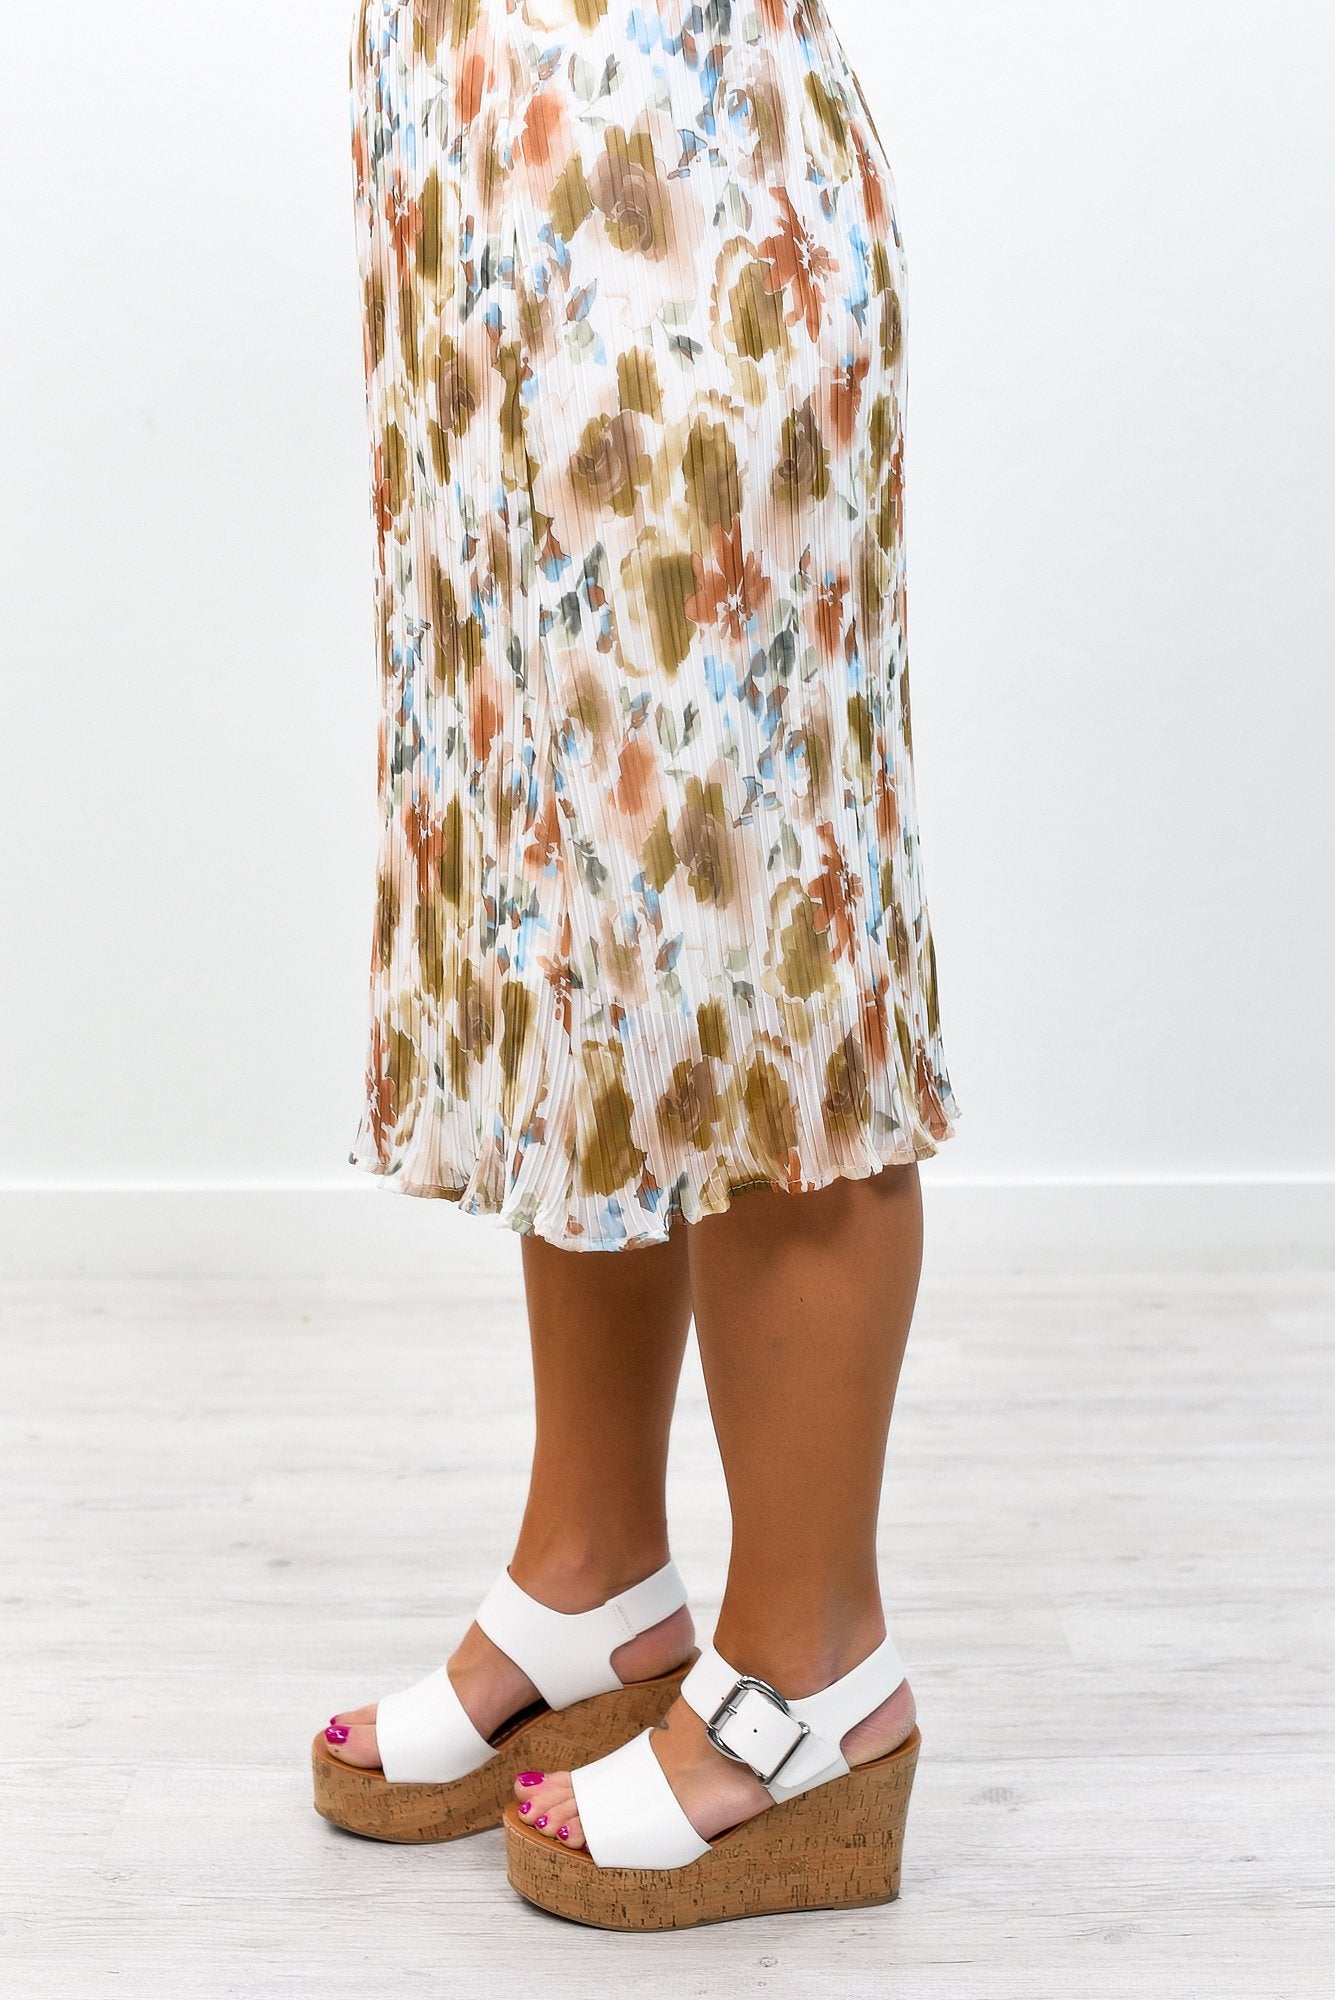 Ready To Twirl White/Multi Color Floral Skirt - E1042WH